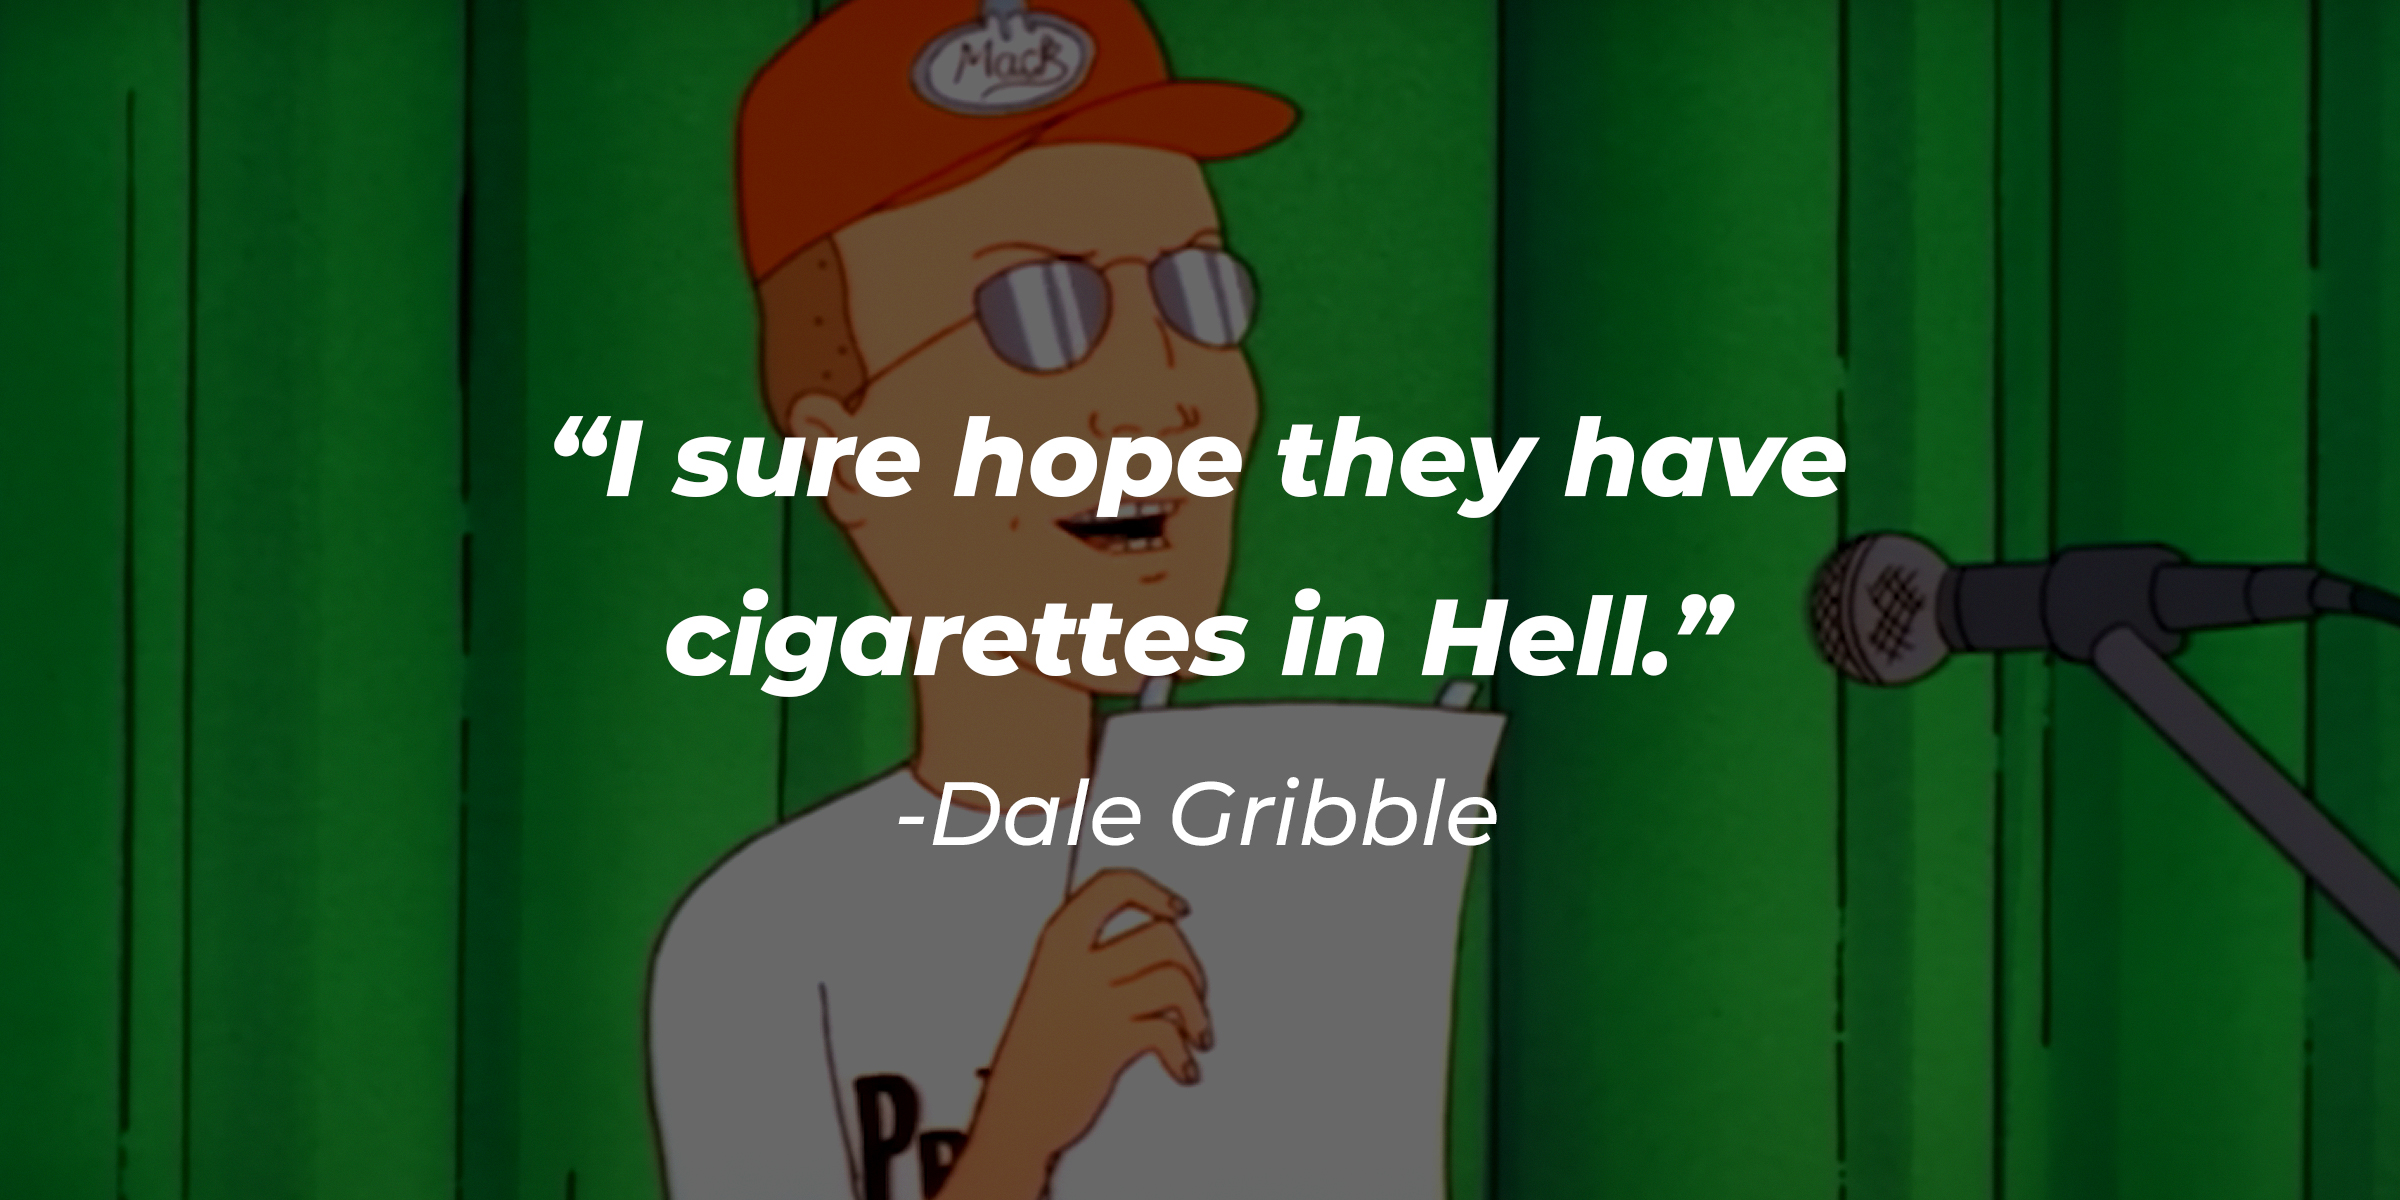 Dale Gribble, with his quote: “I sure hope they have cigarettes in Hell.” | Source: Youtube.com/adultswim